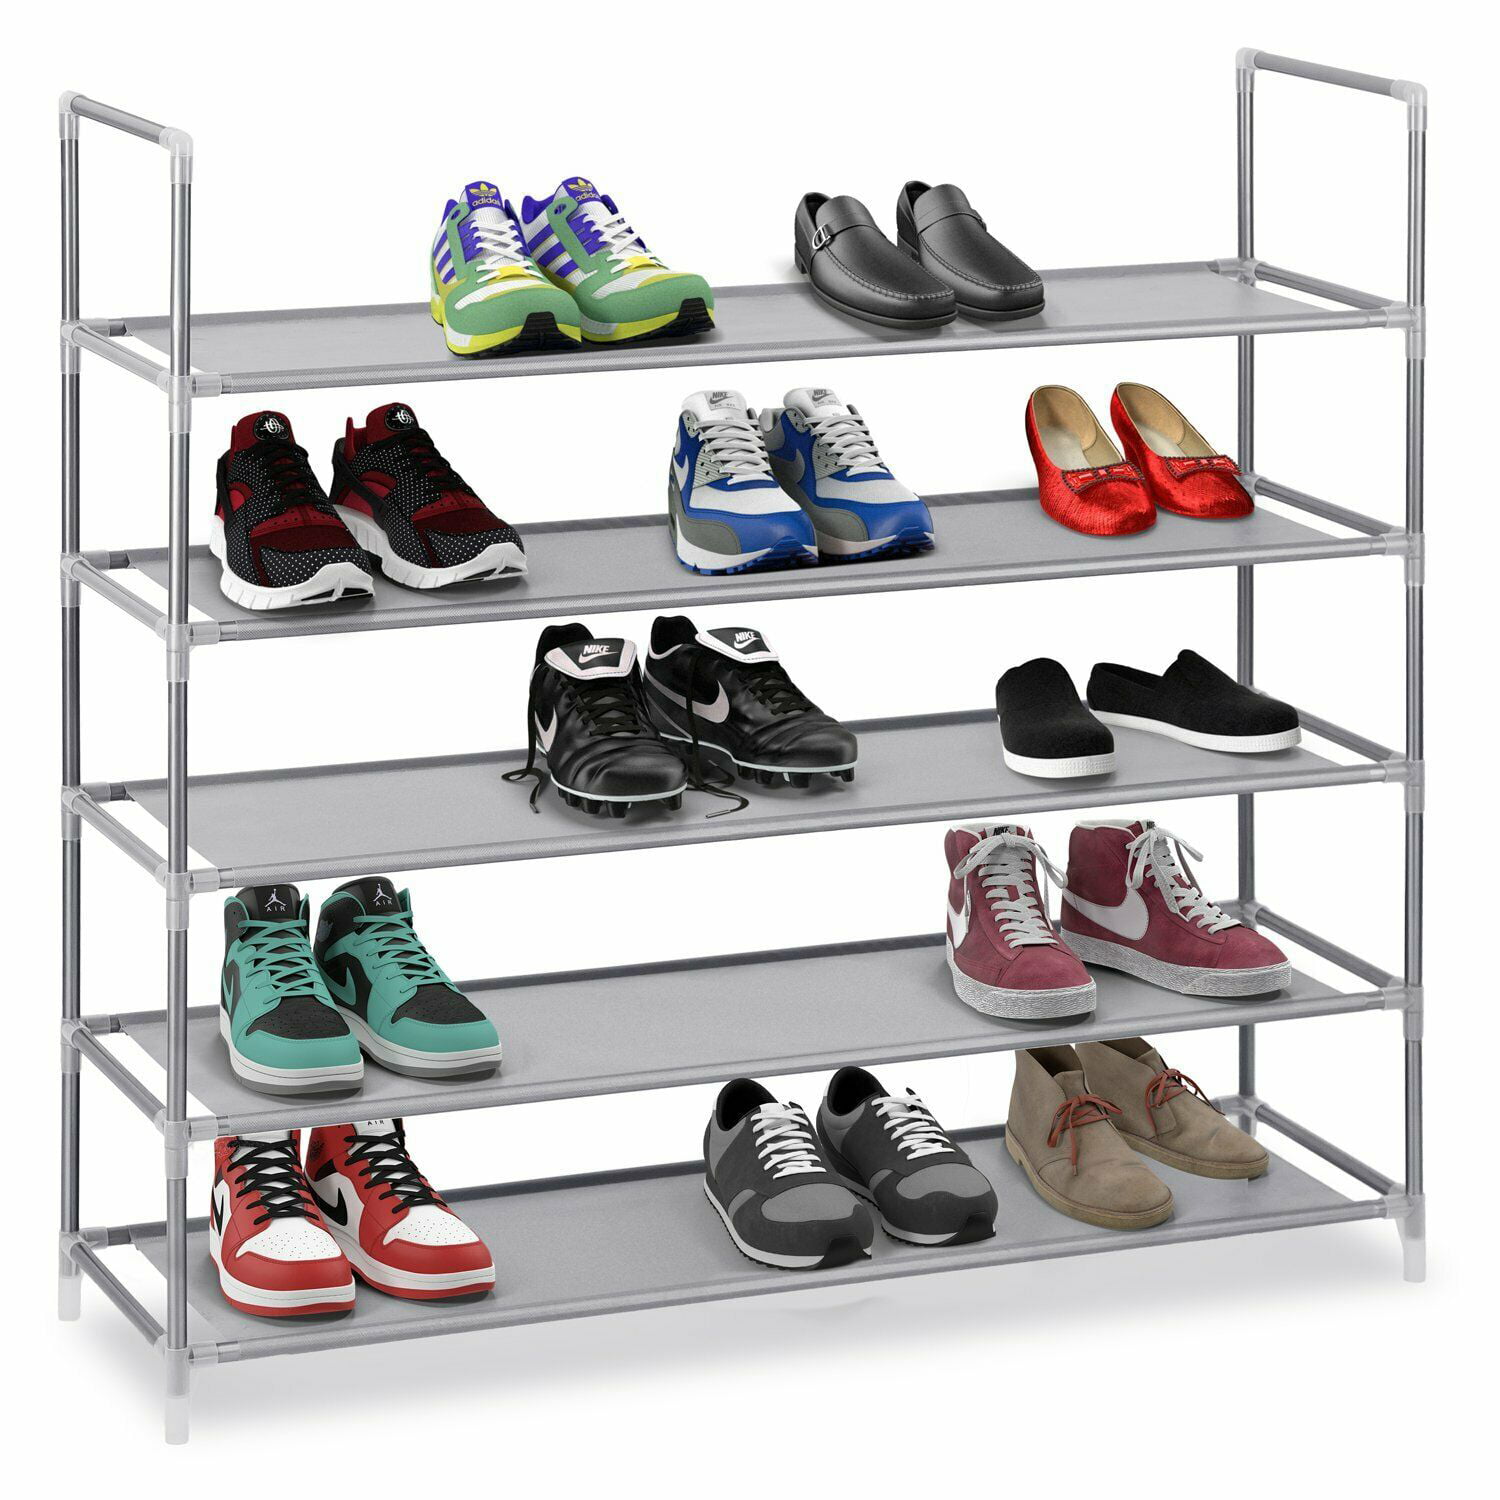 5 Tier Shoe Rack Stand Storage Stackable Organizer for 25 Pairs Shoes Space Save 